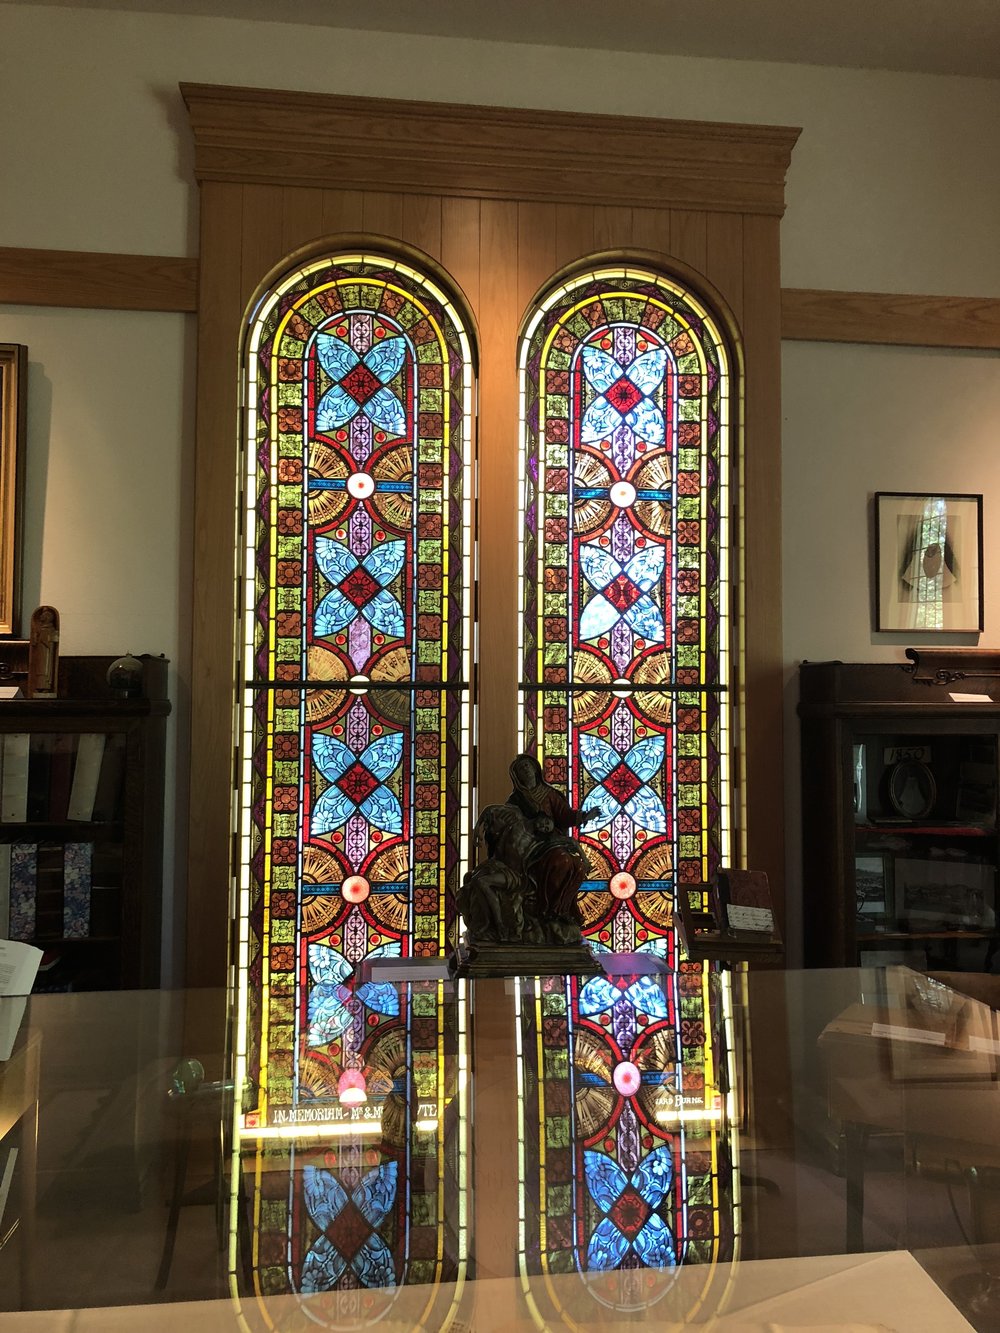  Heritage Room windows | © 2018 Lucas Stained Glass Design + Restoration 